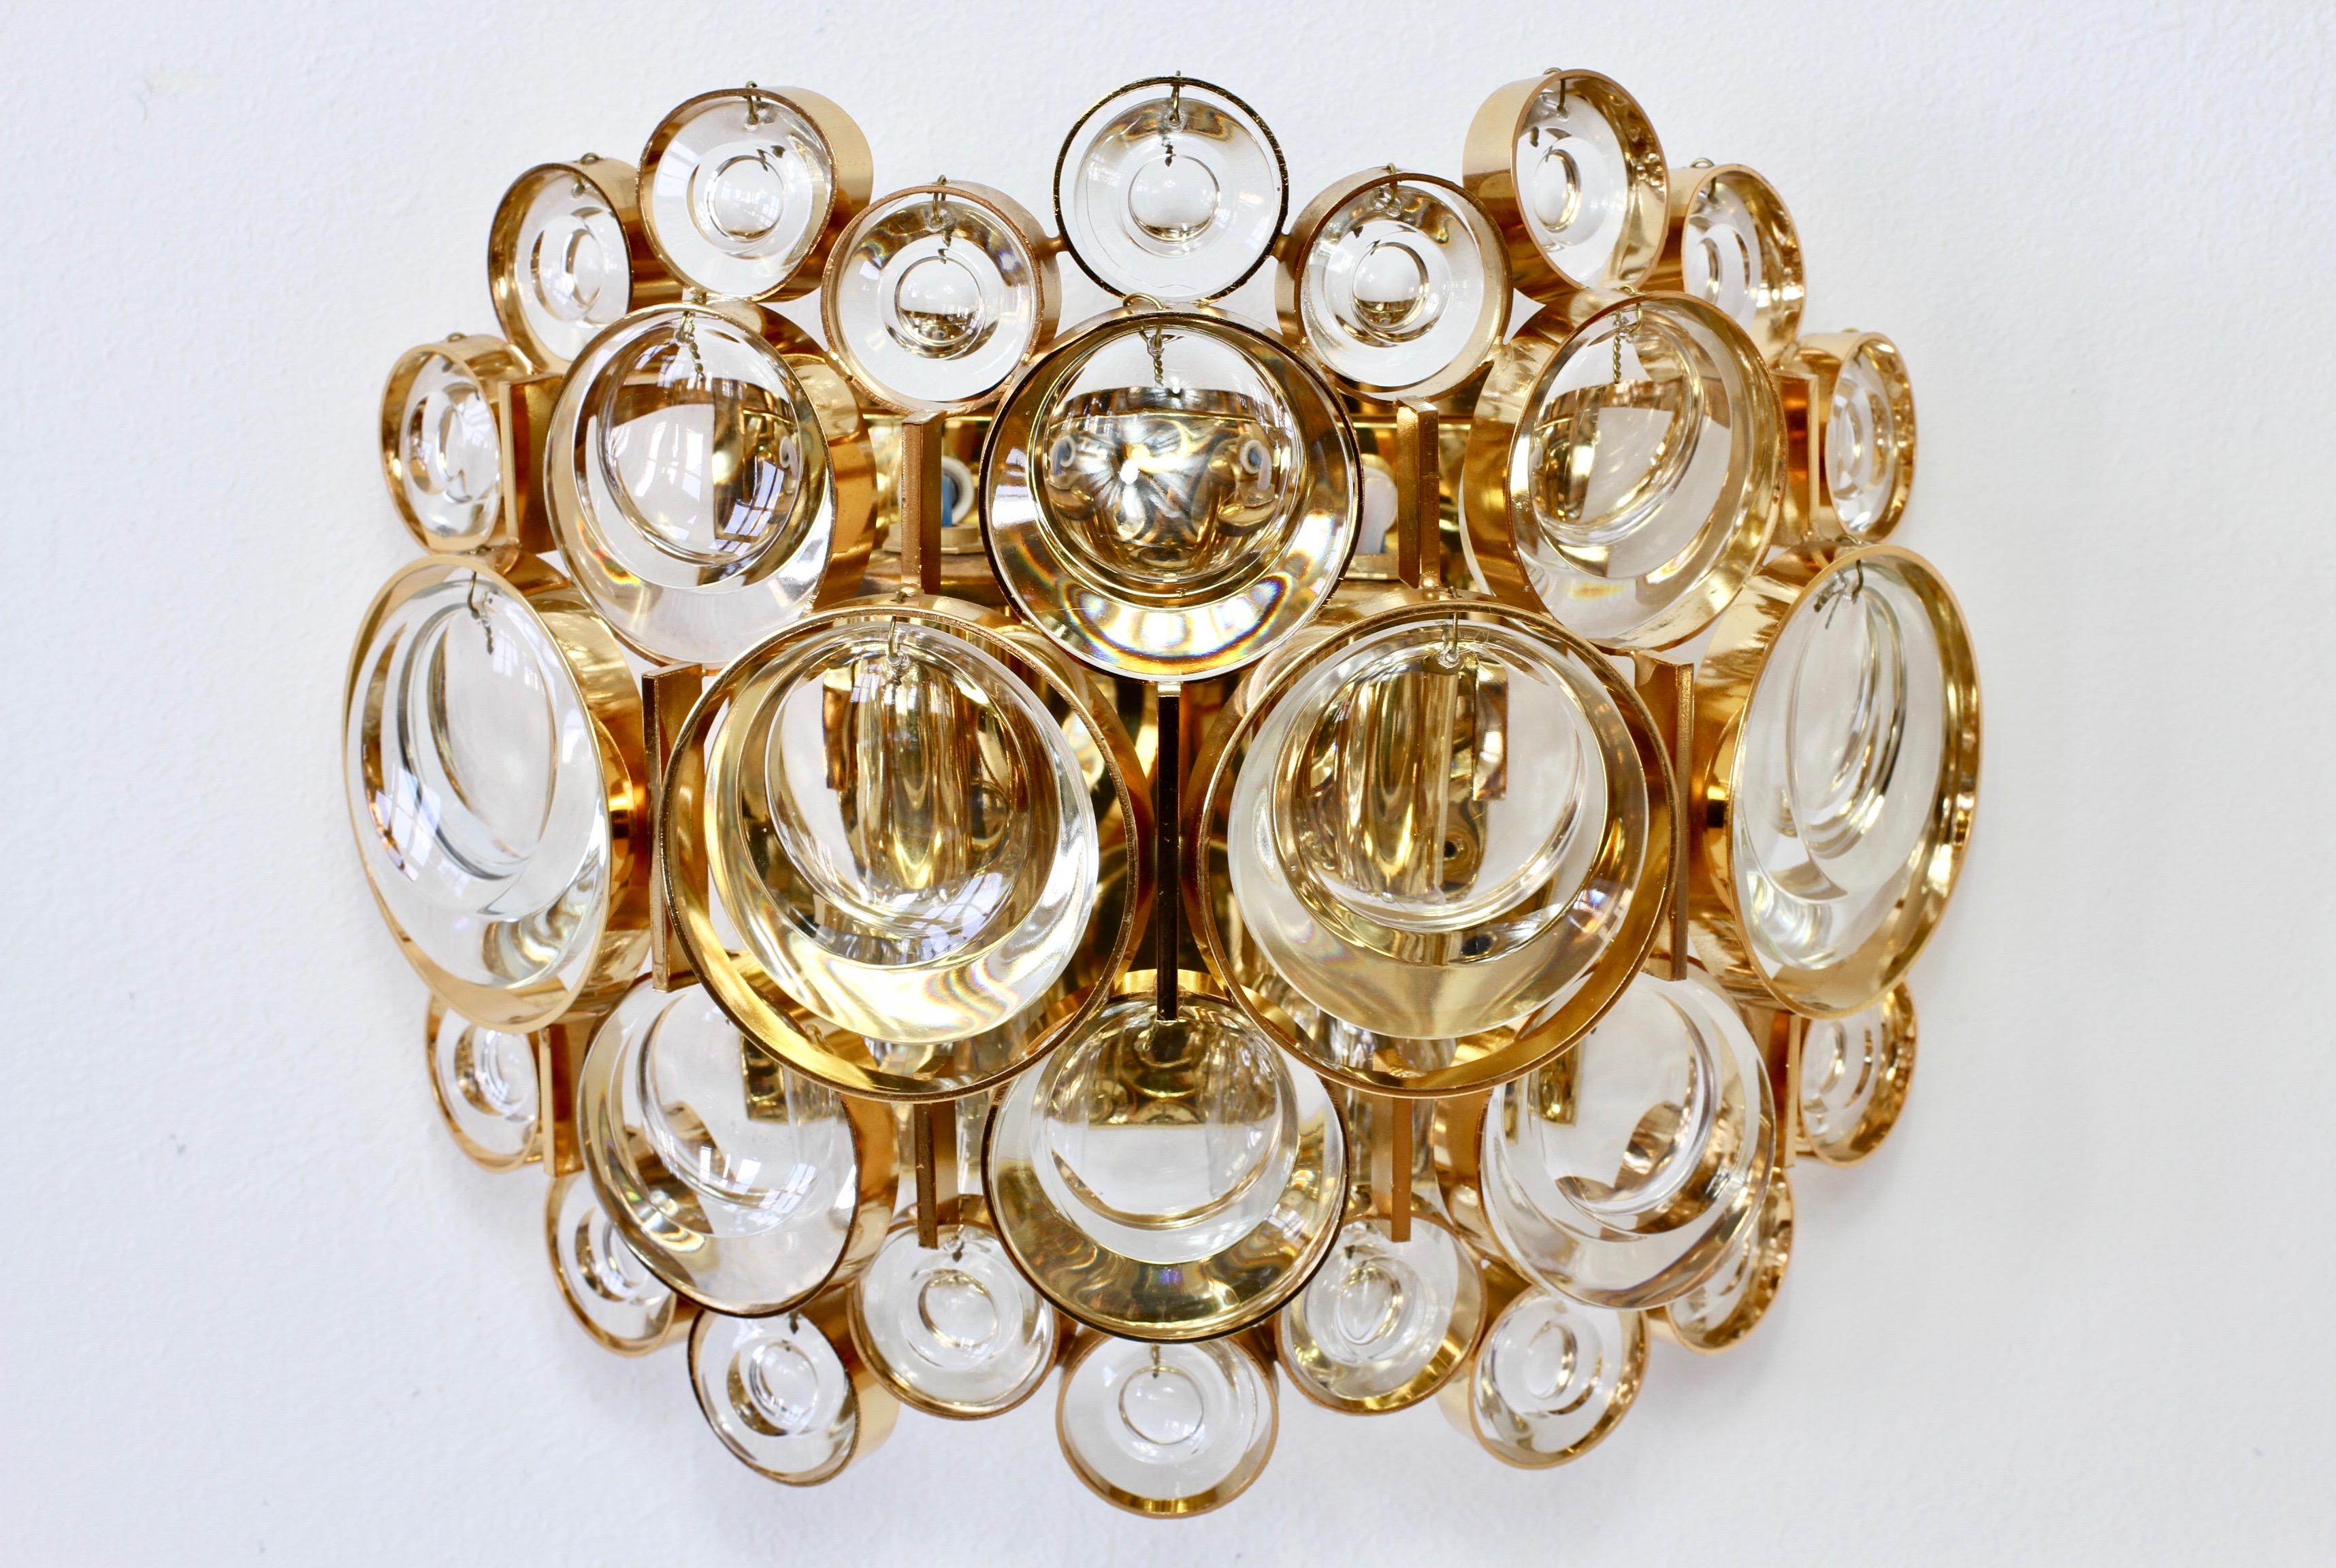 Stunning Pair of German Mid-Century Crystal Glass Wall Lights / Sconces by Palwa 3